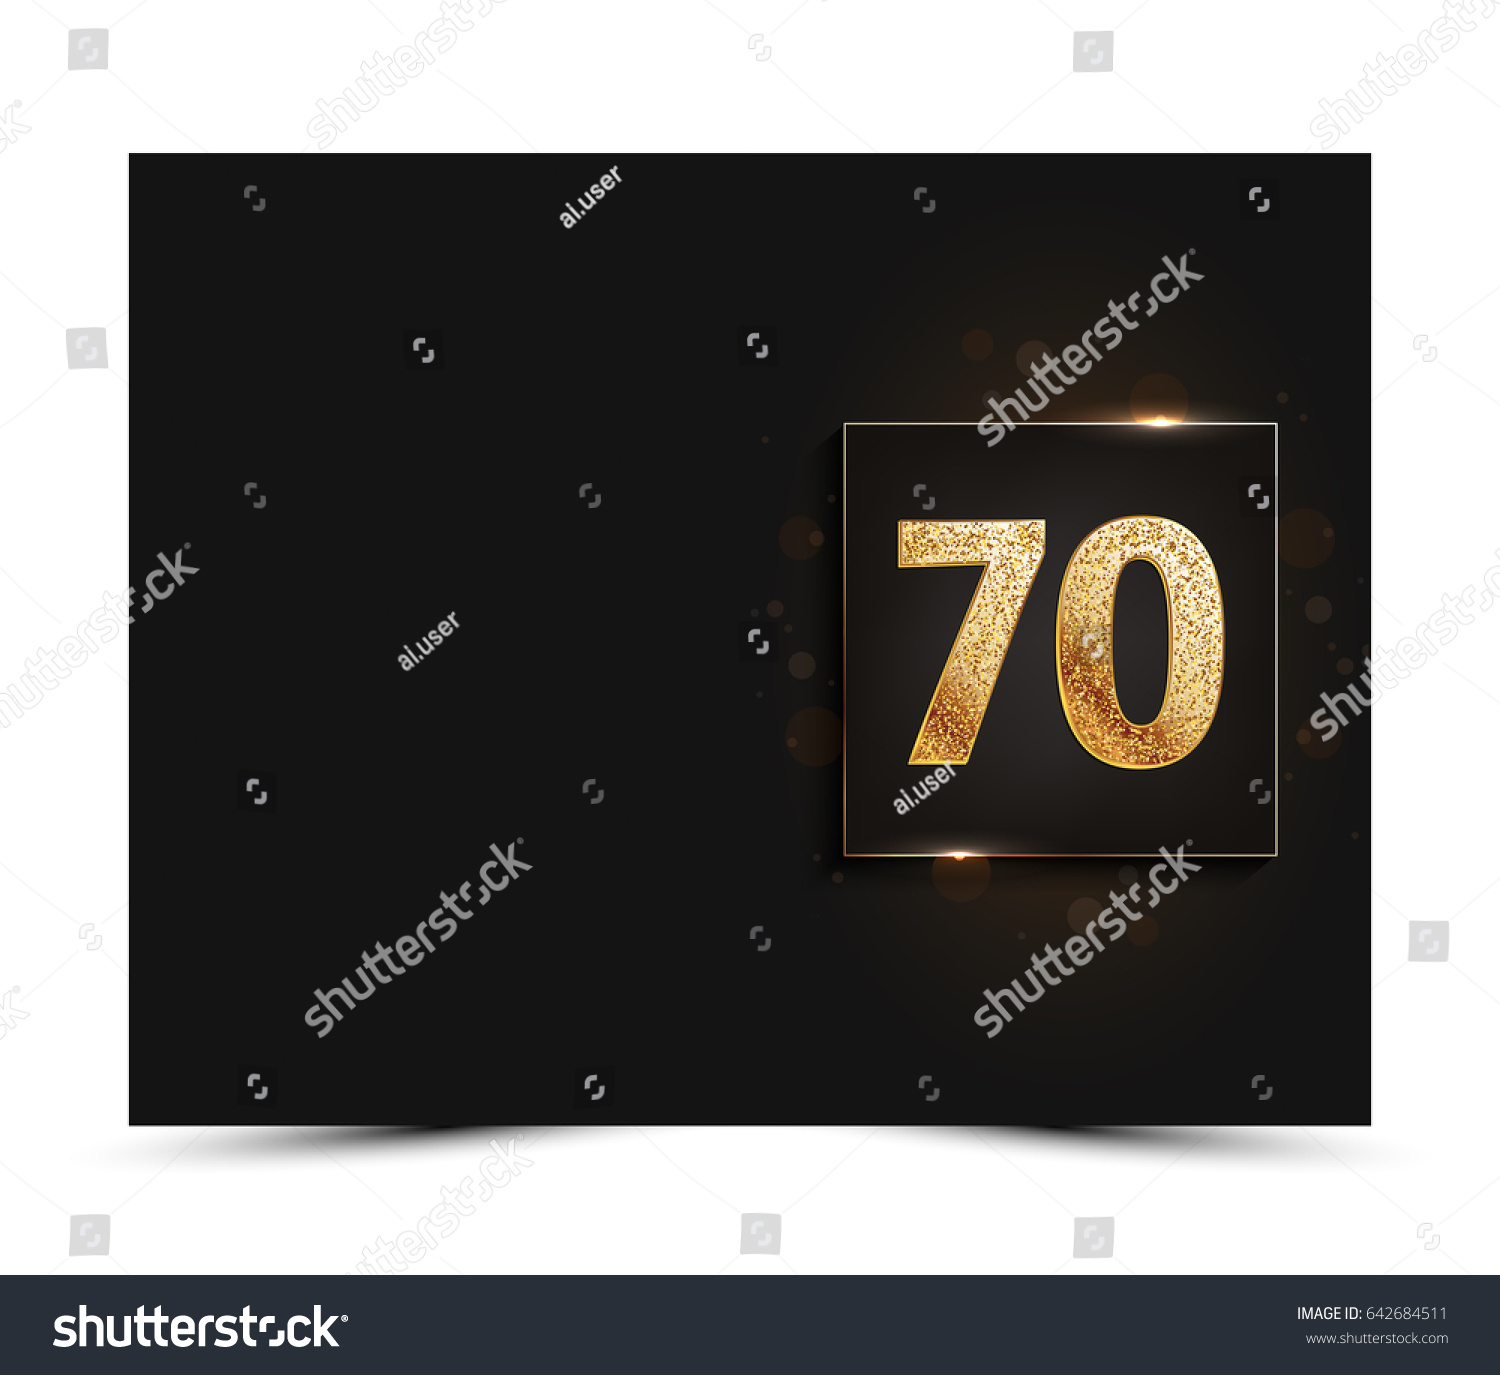 SVG of 70th anniversary decorated greeting / invitation card template with gold elements. svg